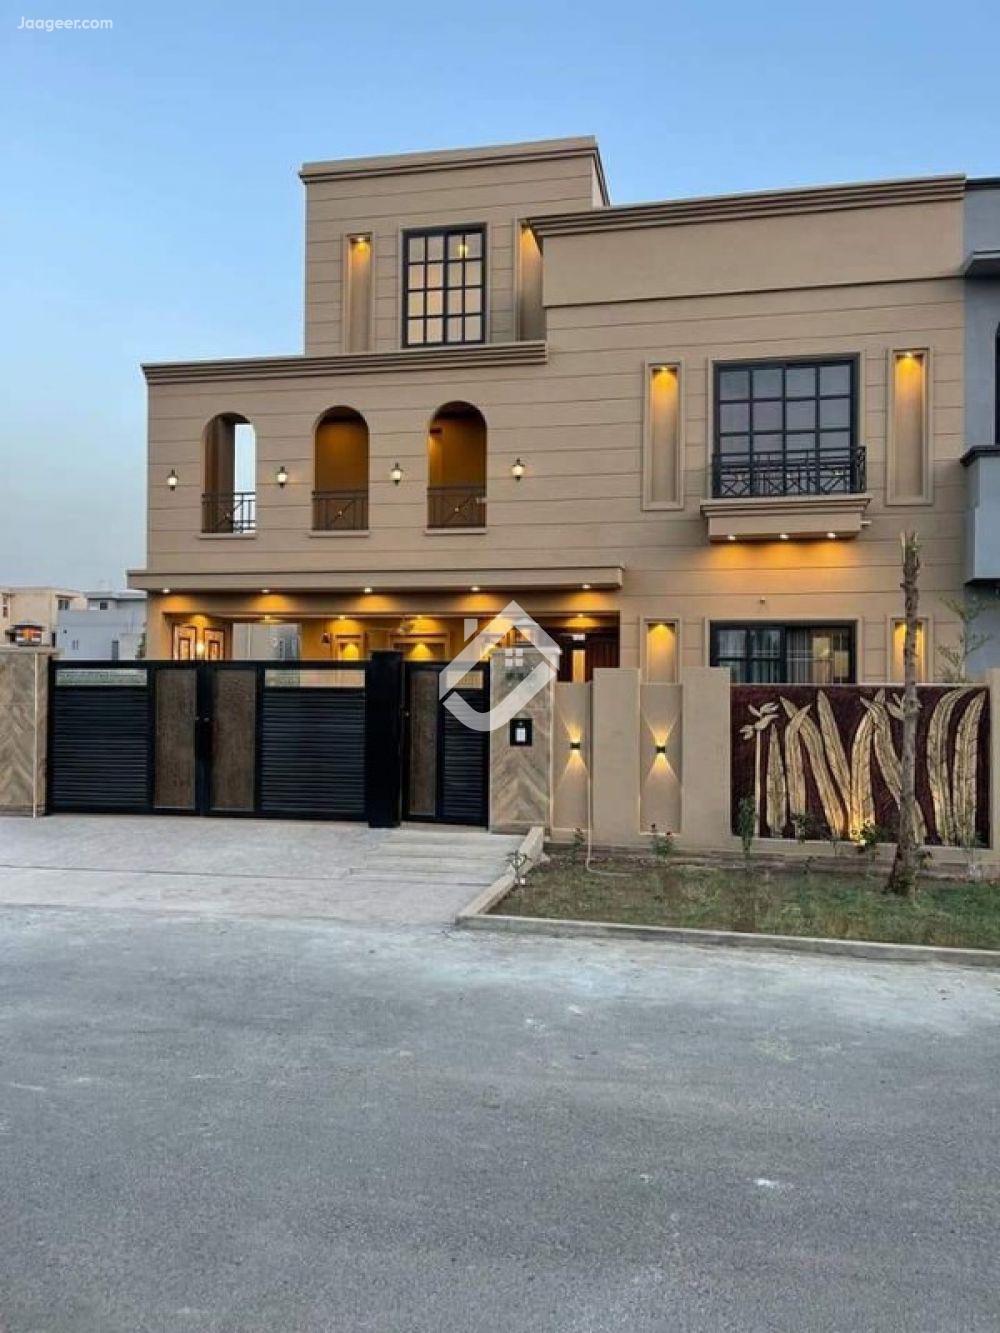 View  10 Marla Double Unit House For Sale In Citi Housing  in Citi Housing , Gujranwala